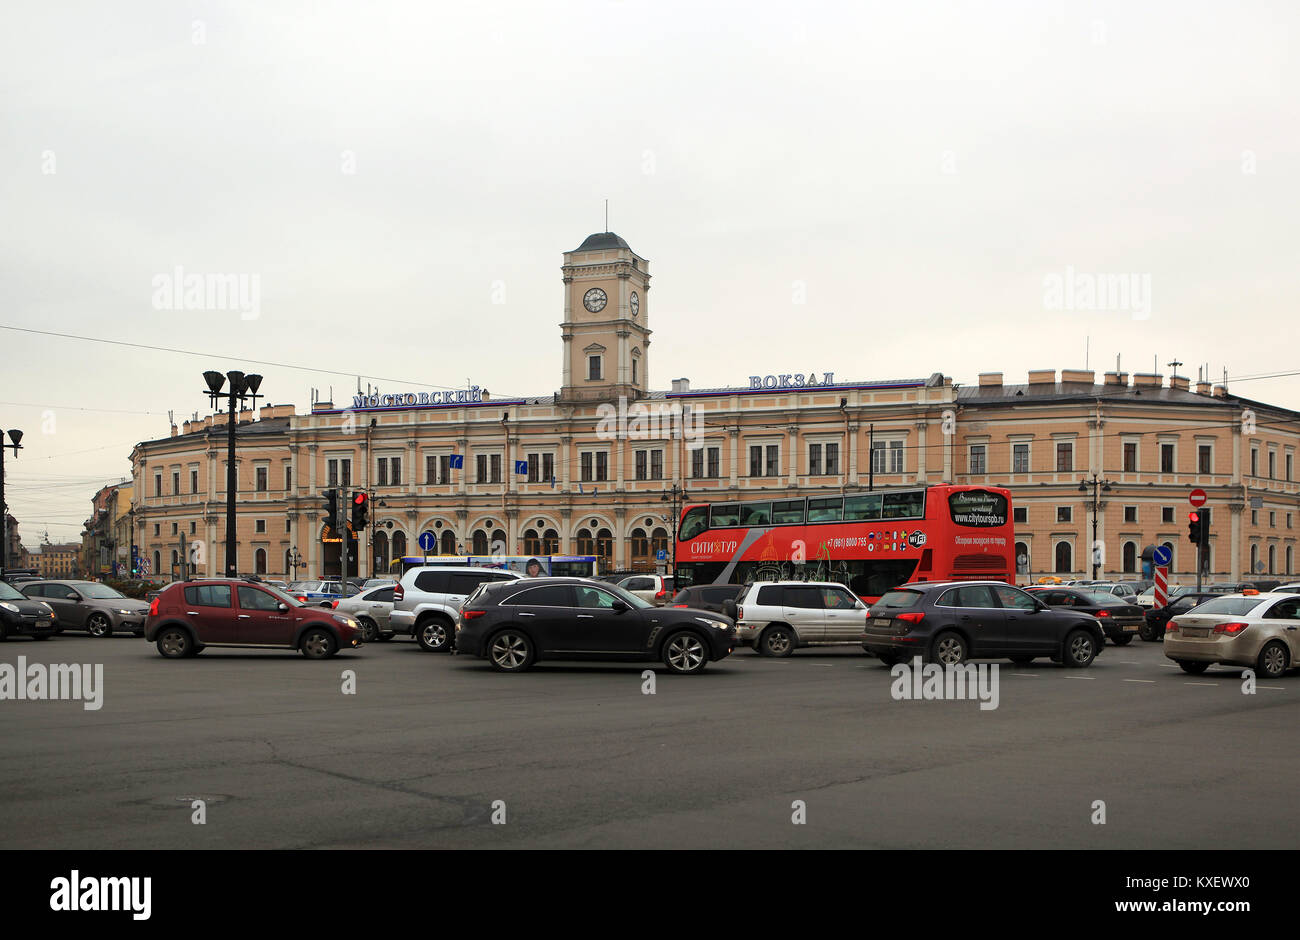 St. Petersburg, Russia - October 28, 2012: Uprising Square and the Moscow station Stock Photo